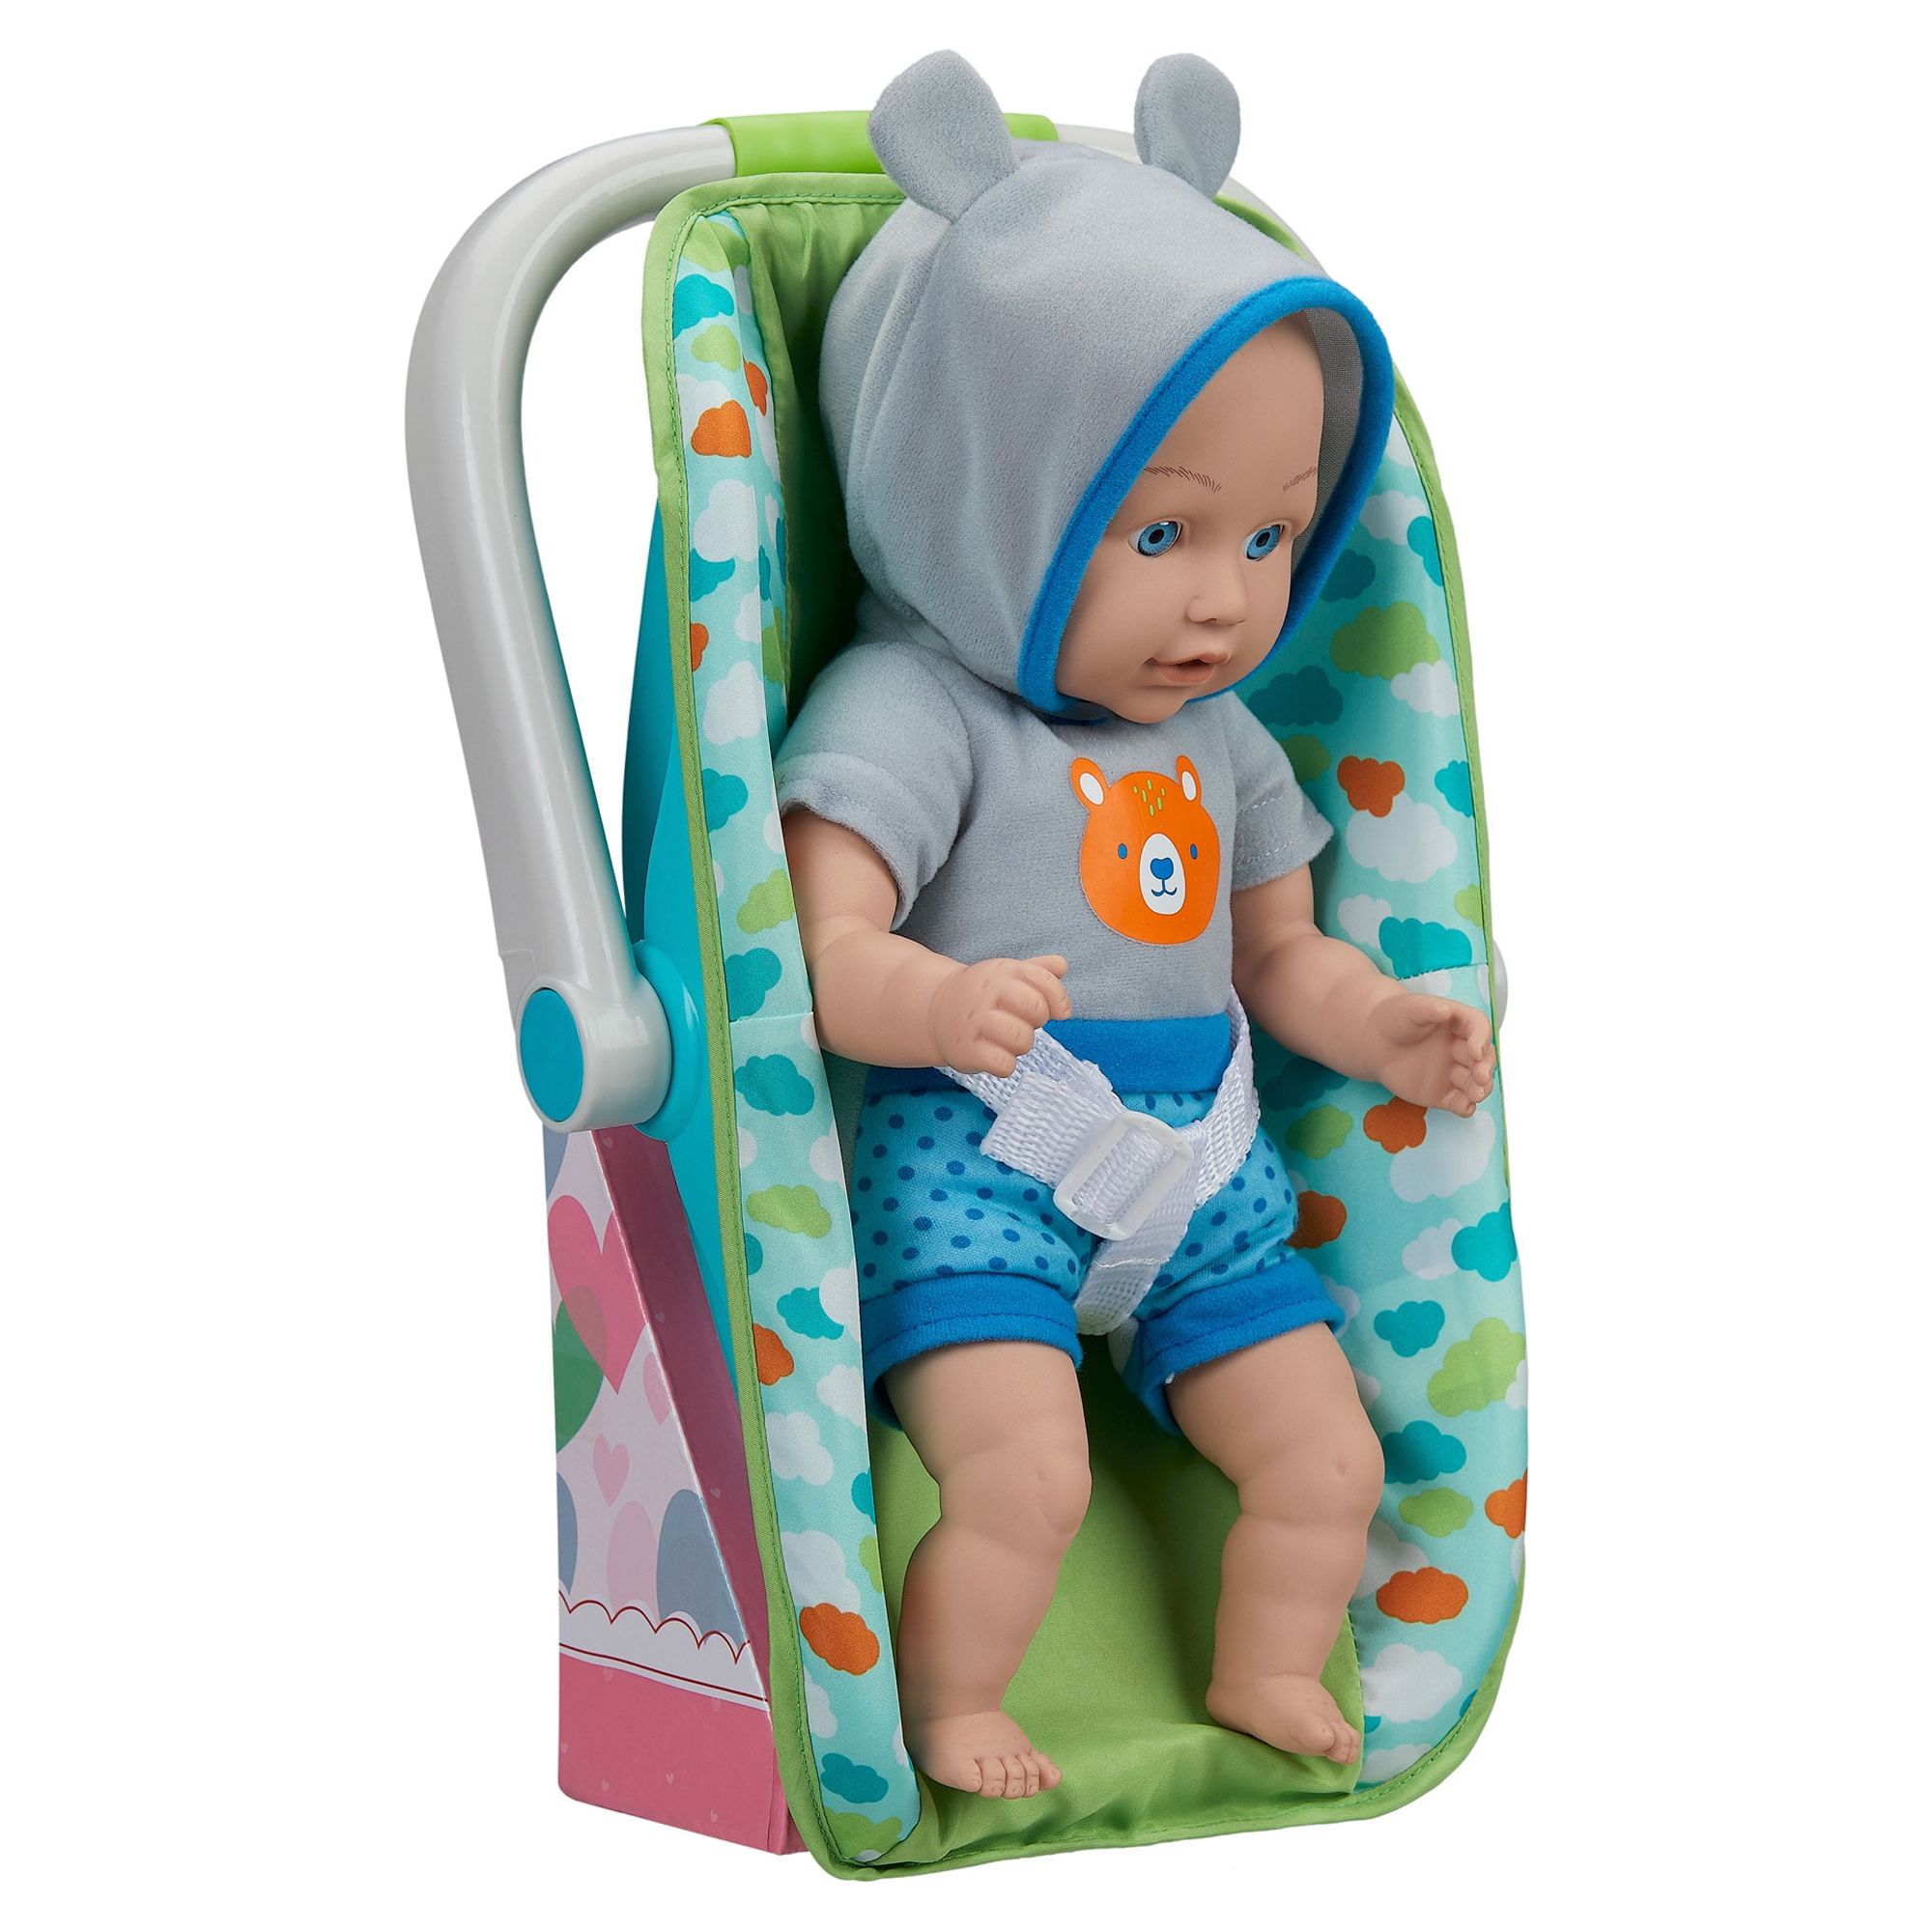 My Sweet Love 13 inch Baby Doll with Carrier and Handle Play Set,  Light Skin Tone, Blue Theme - image 5 of 7